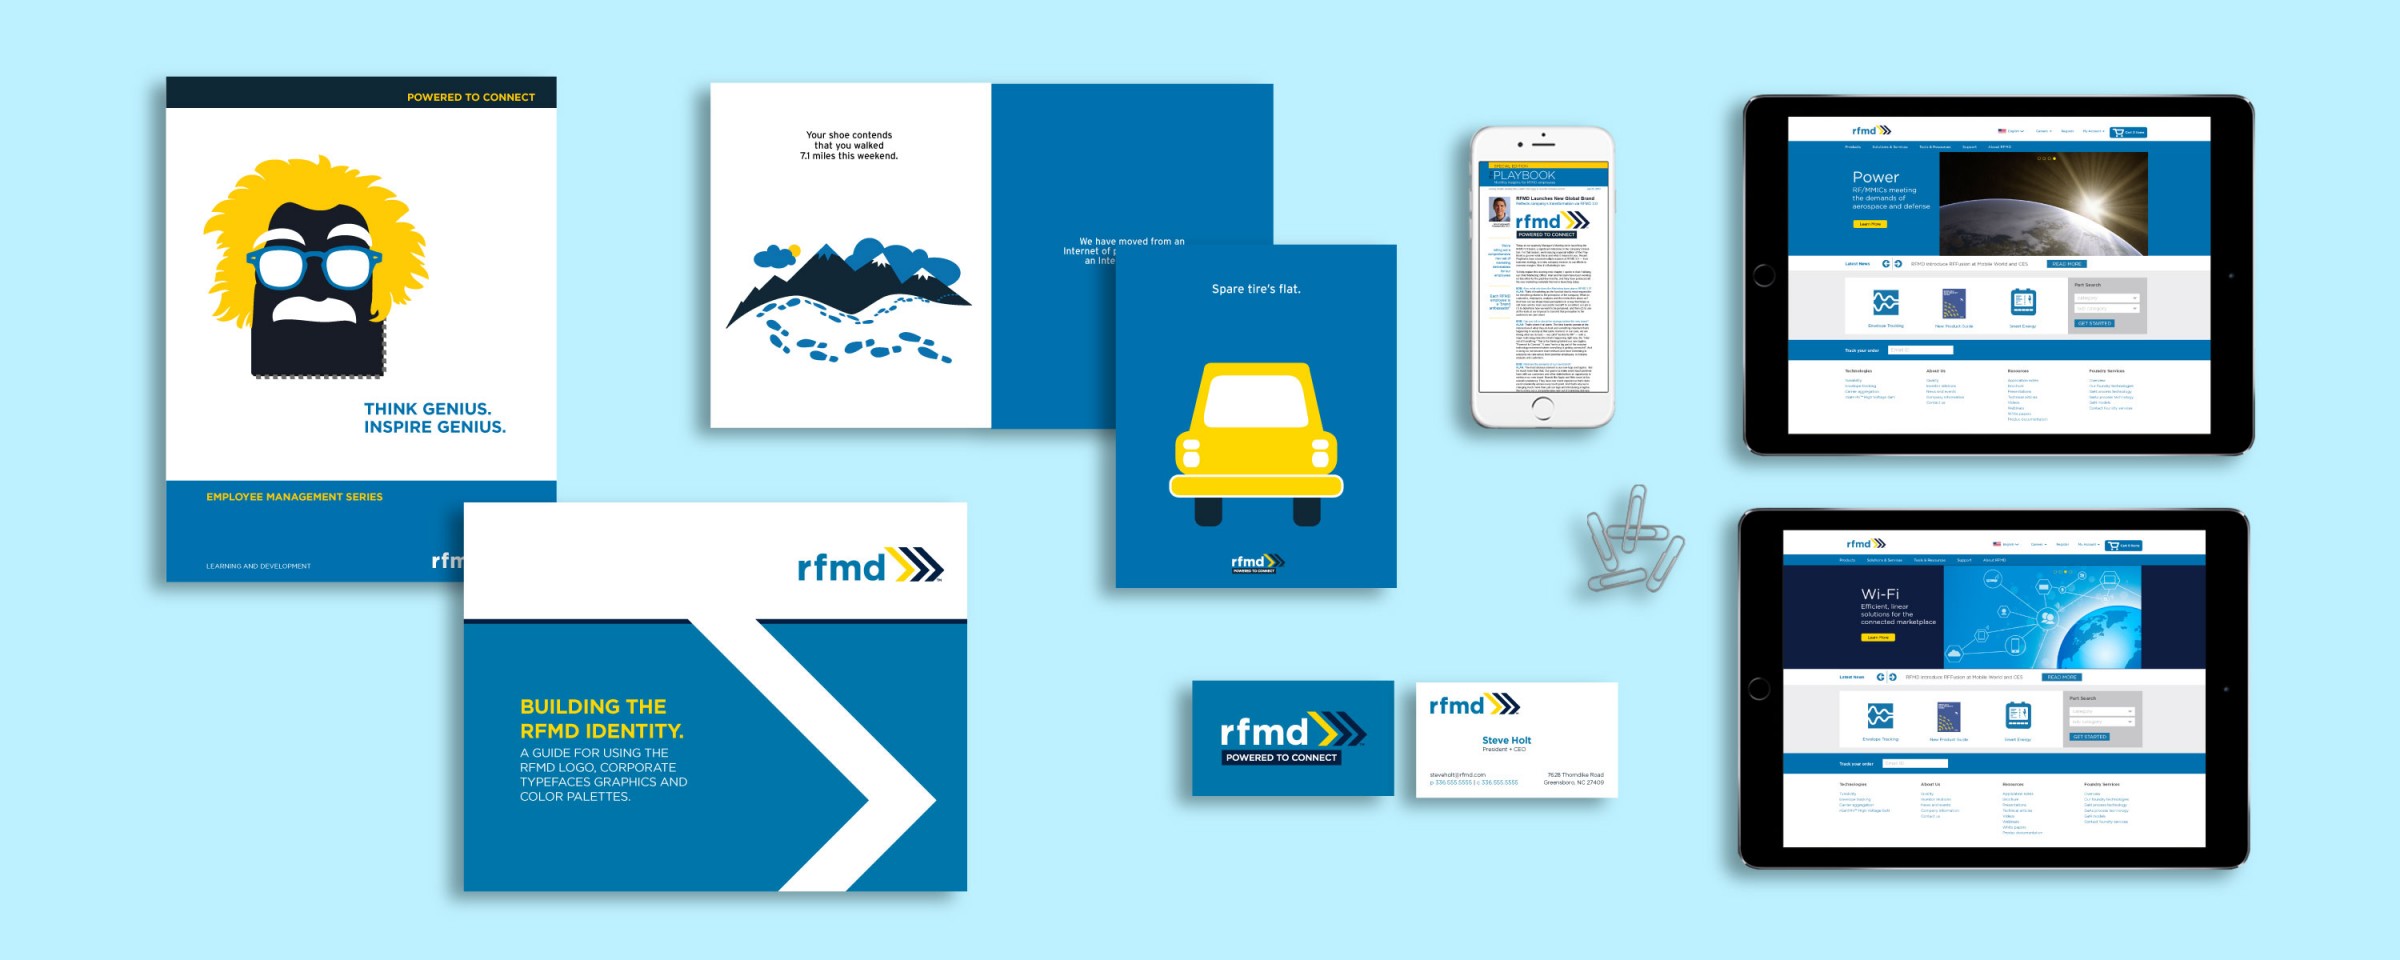 Branding work created for RFMD.